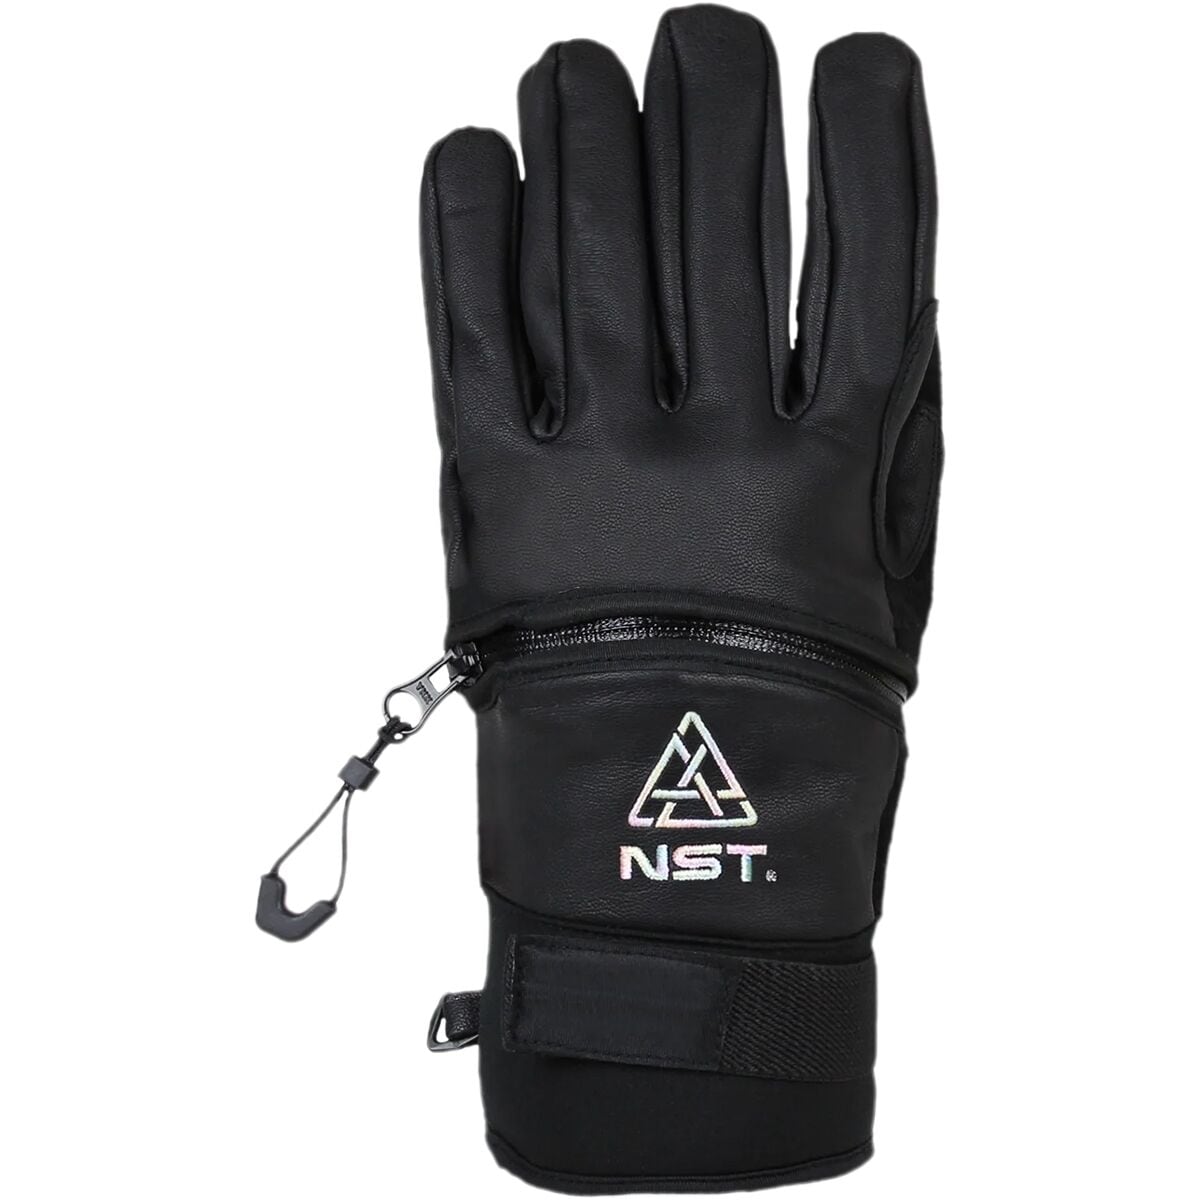 Hand Out Gloves Natural Selection Tour Glove - Men's Black